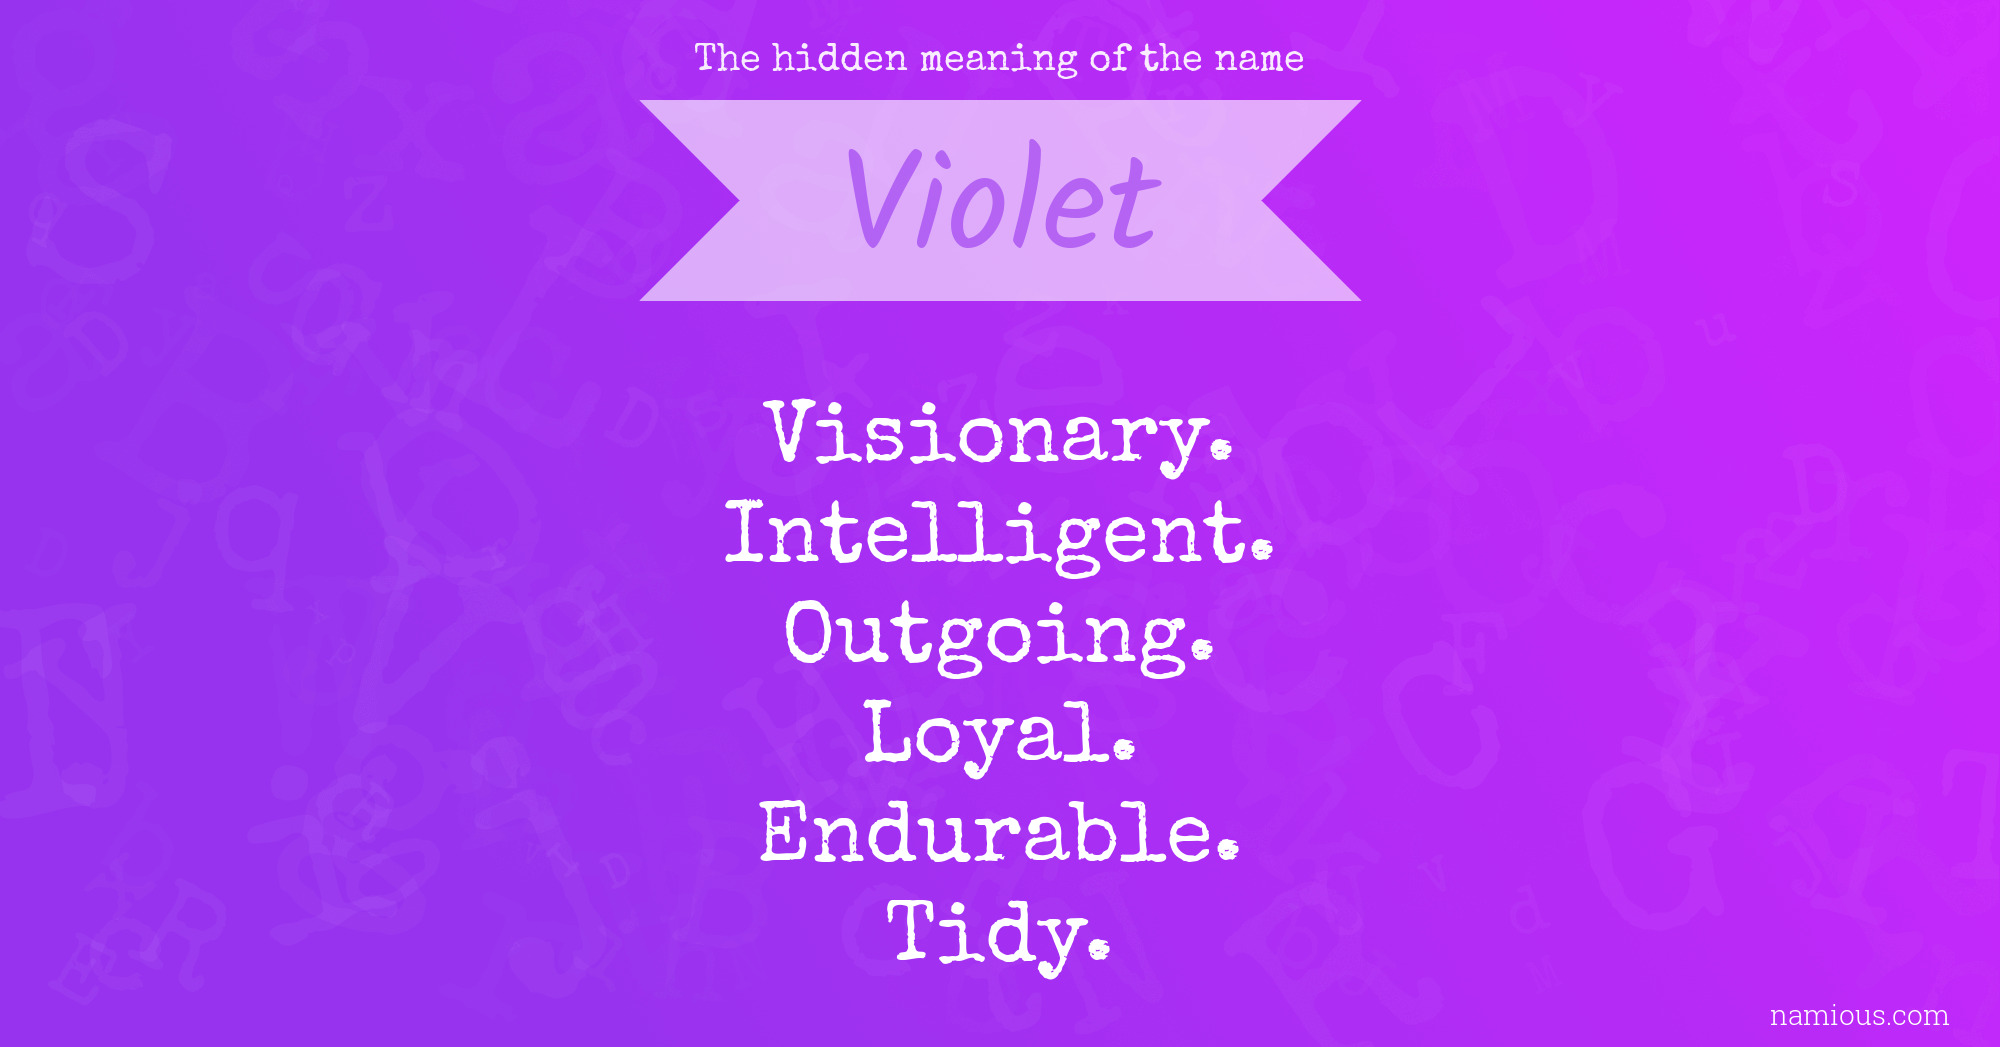 The hidden meaning of the name Violet